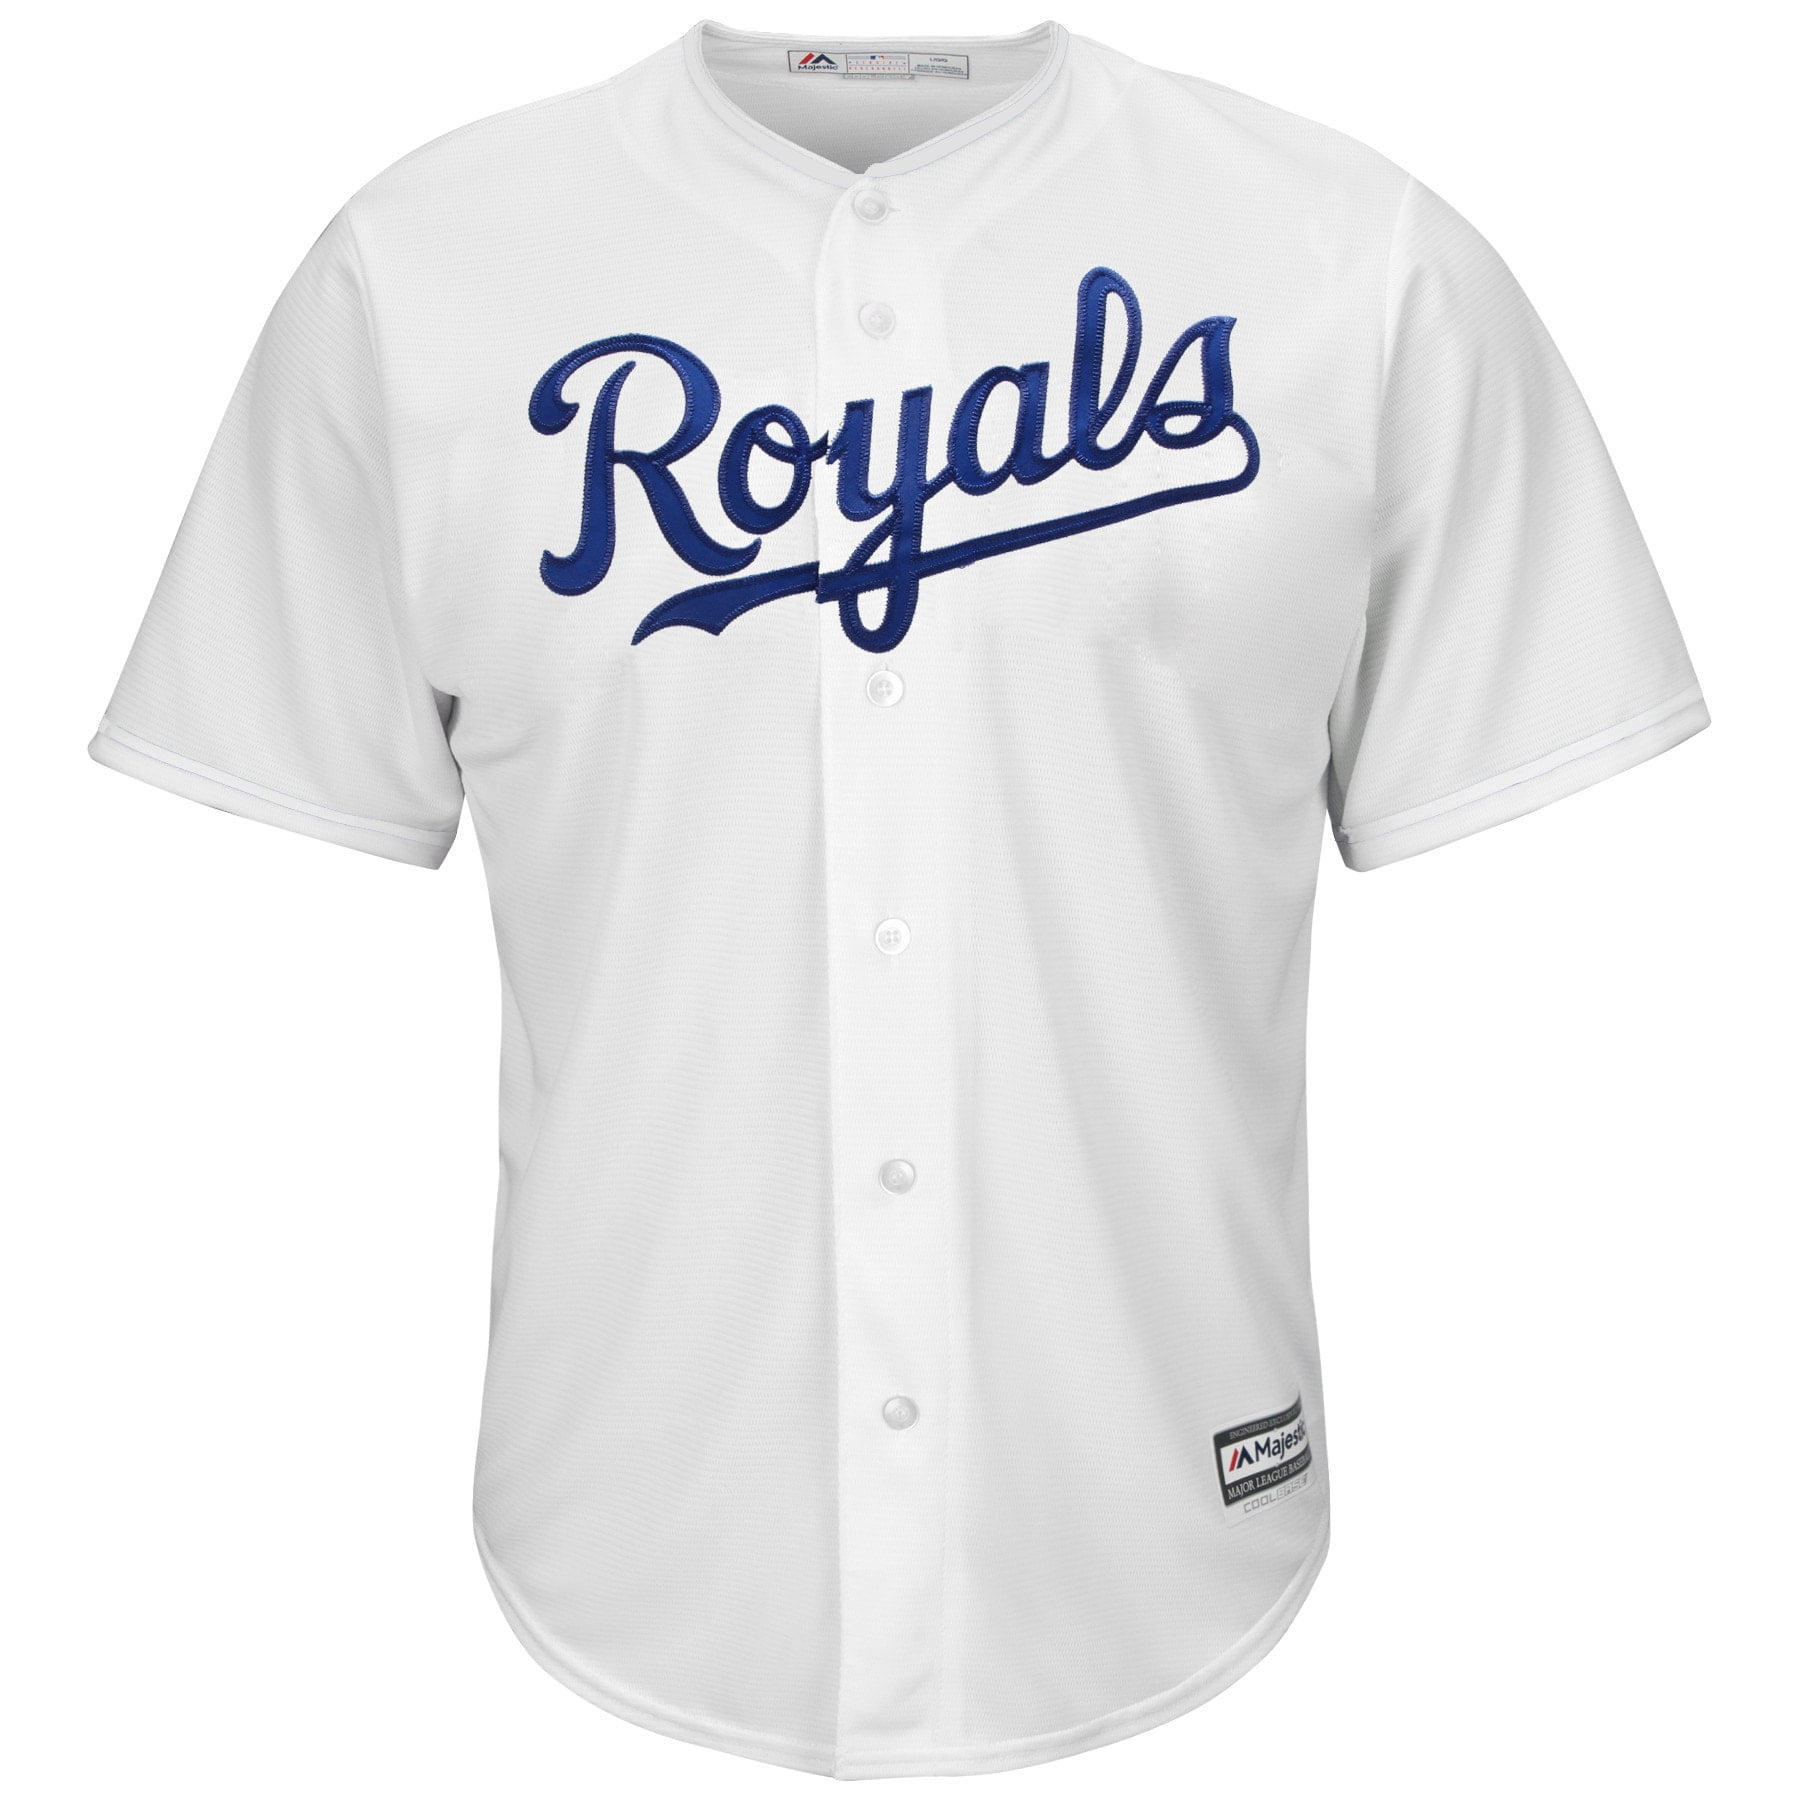 official royals jersey